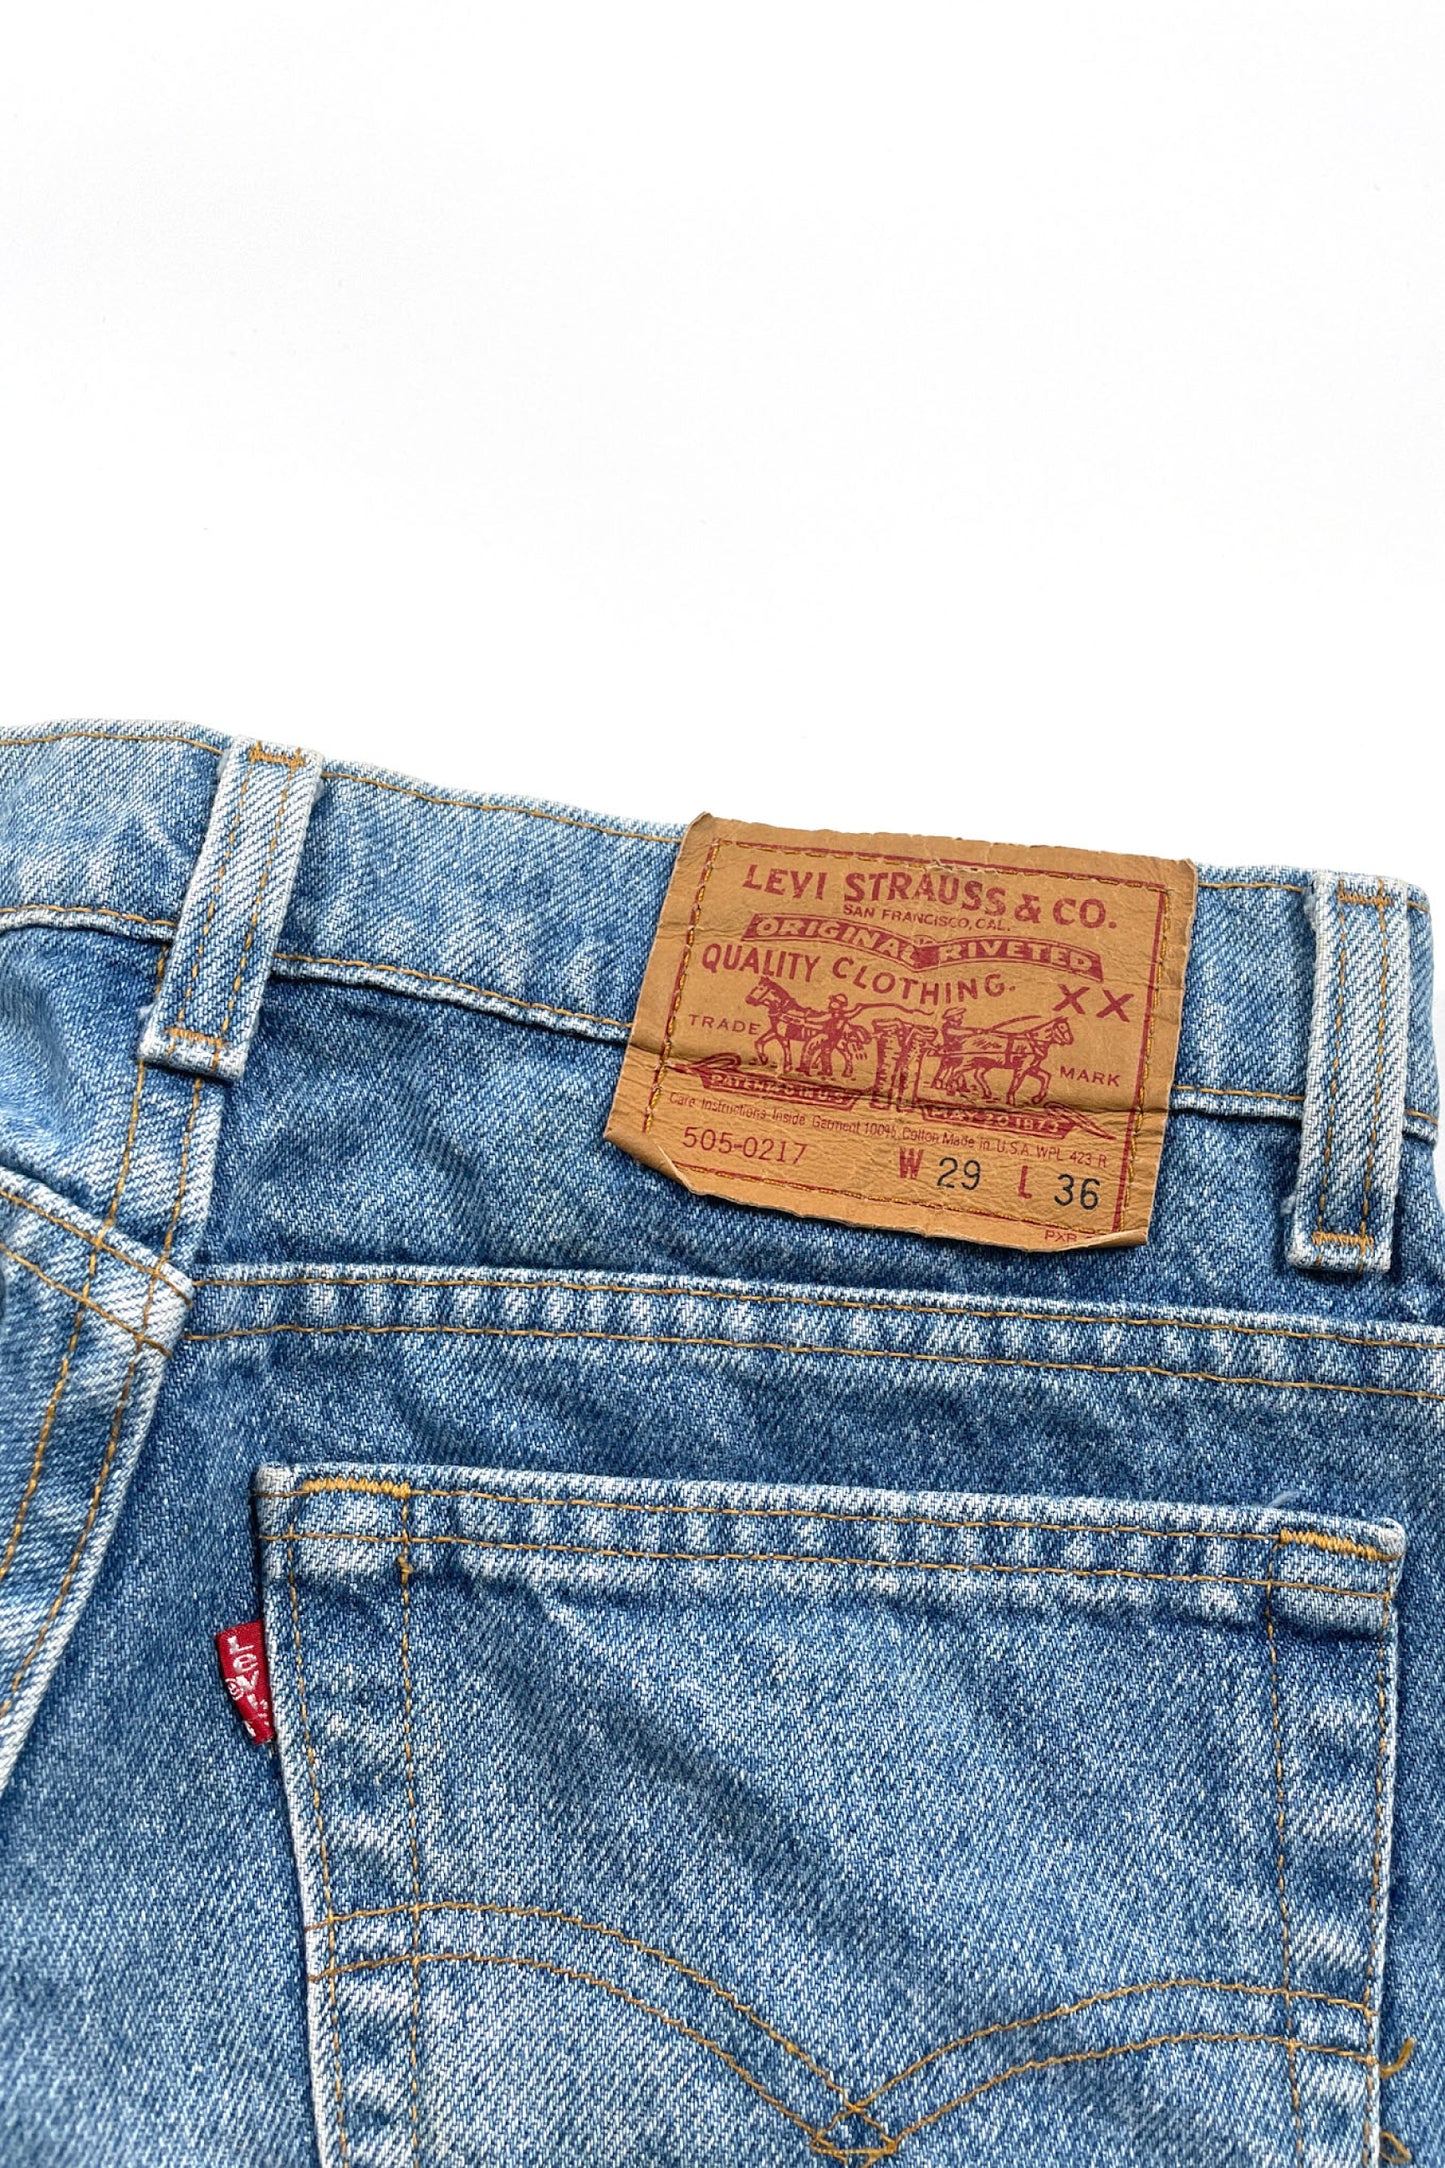 90's Made in USA Levi's 505-0217 denim pants